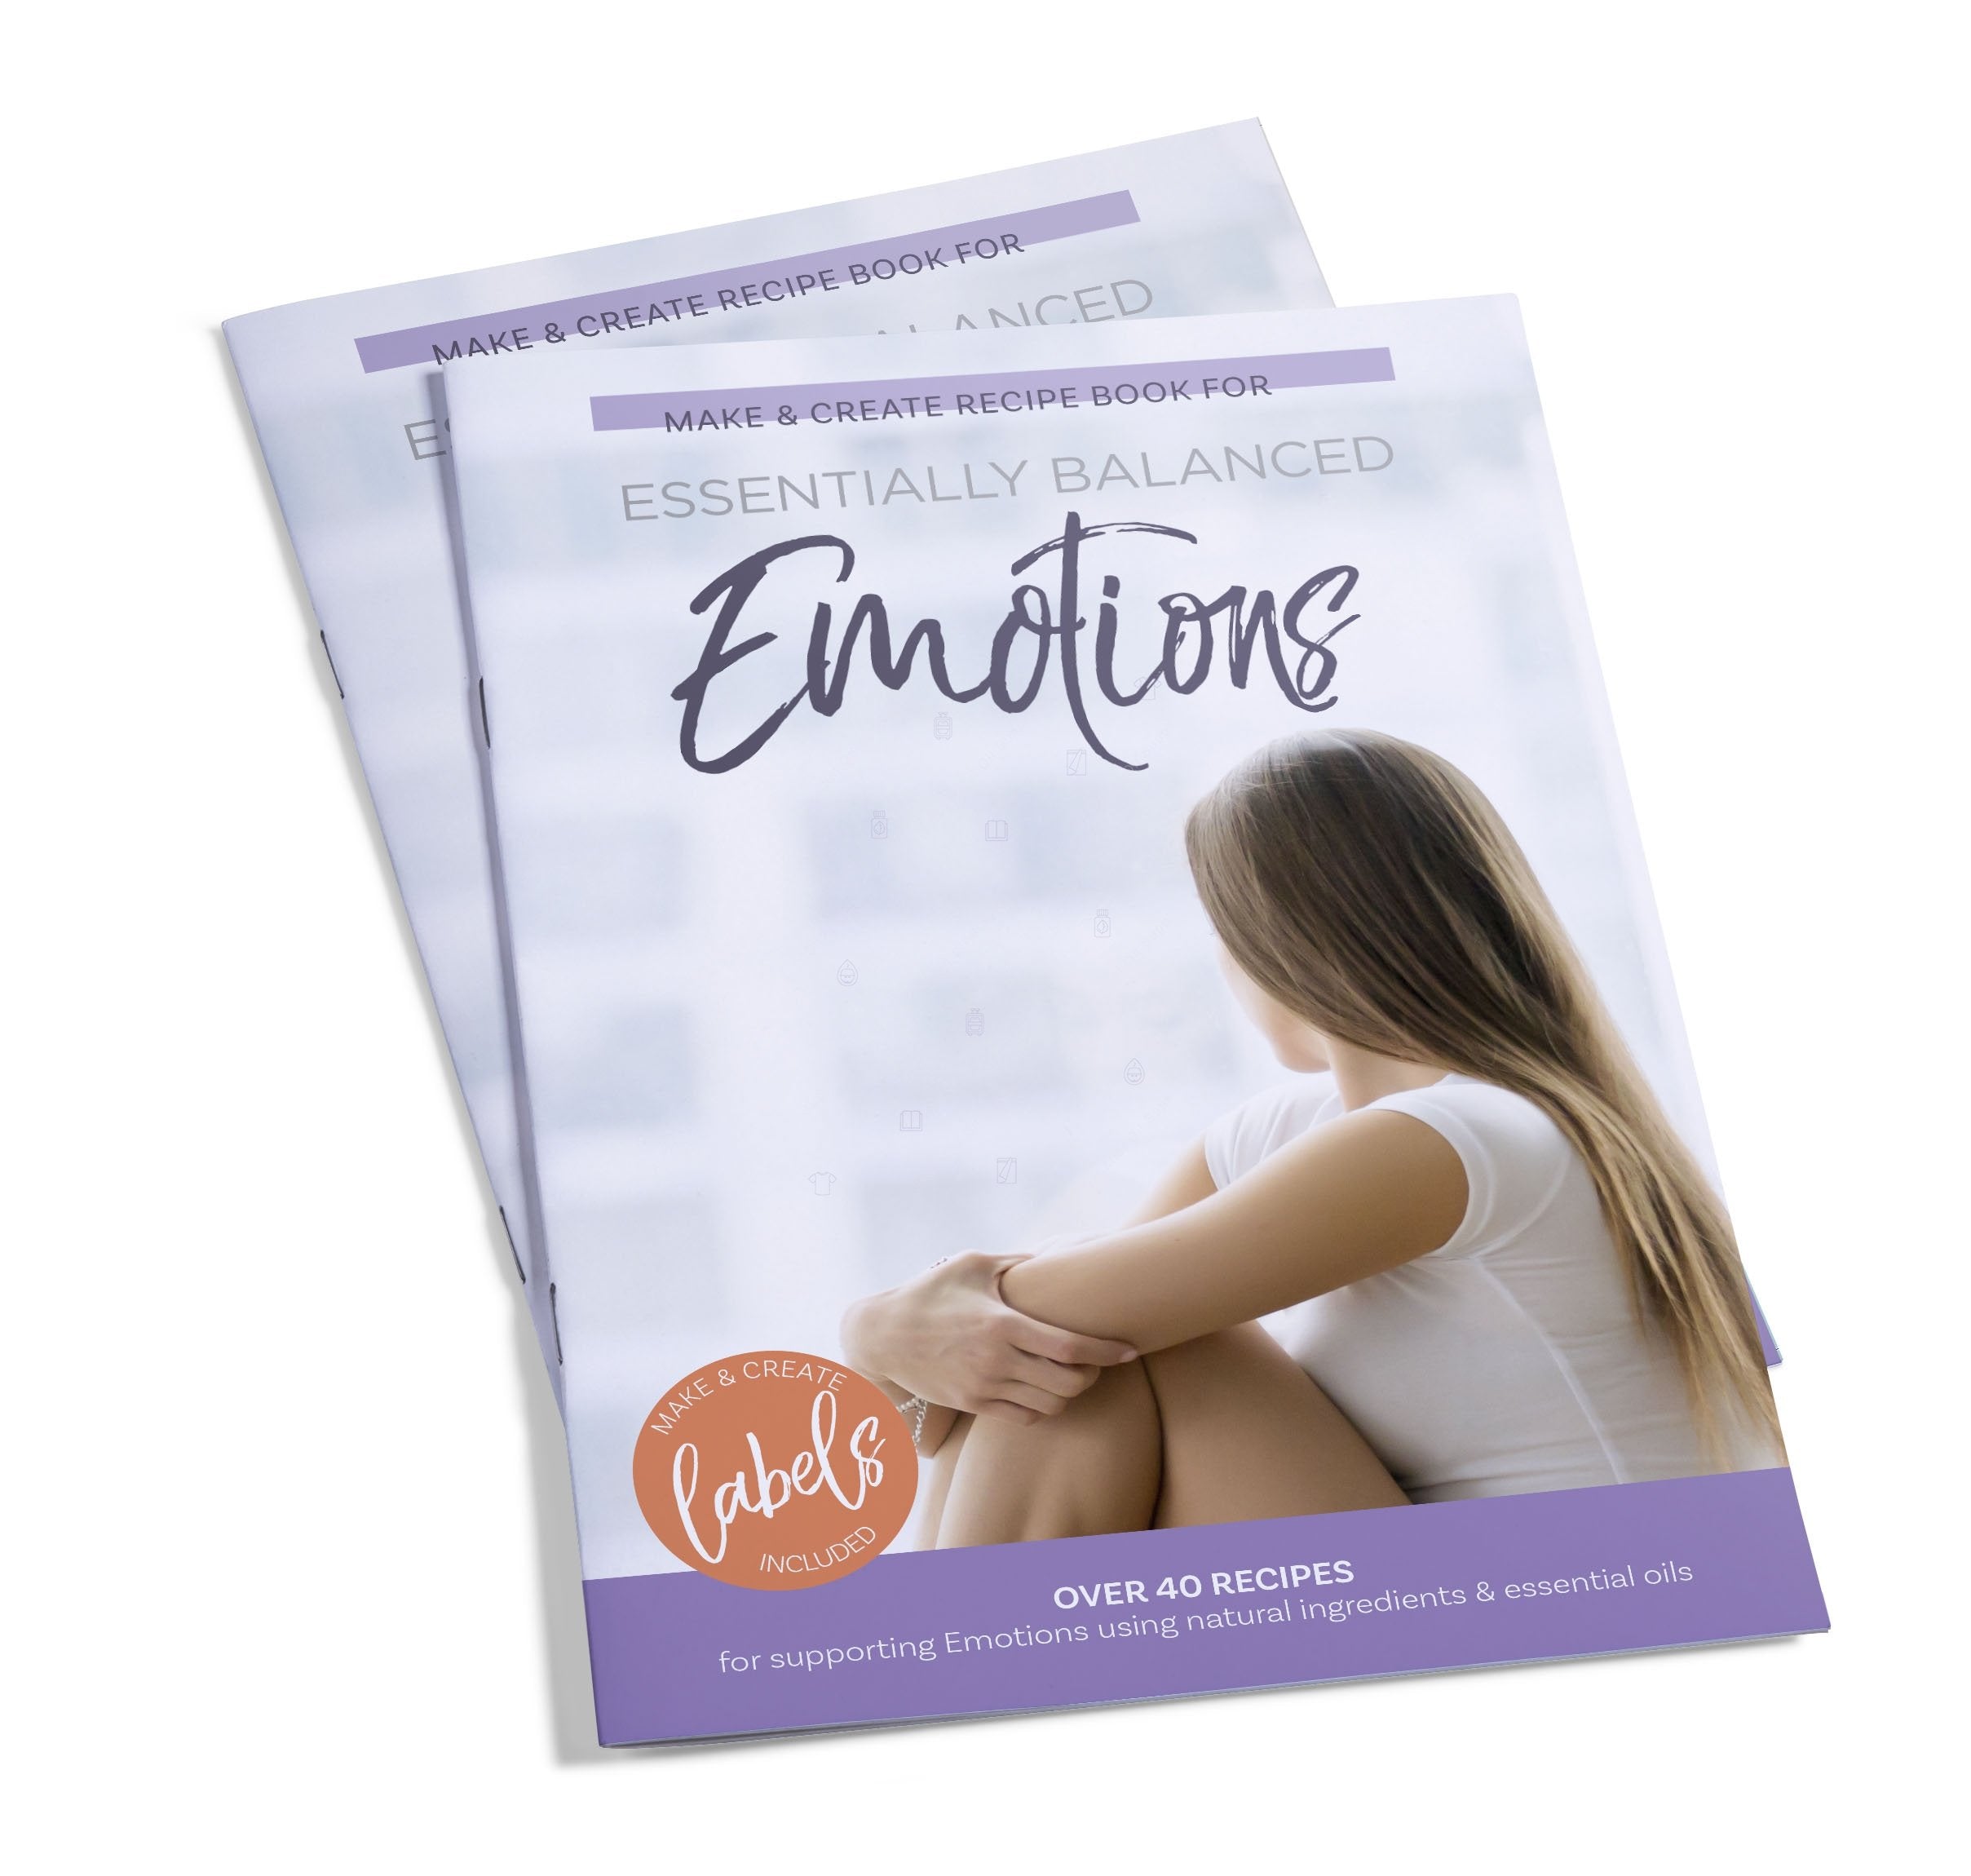 Essentially Balanced Emotions Make & Create Recipe Book with Trish Nash (includes over 40 labels)